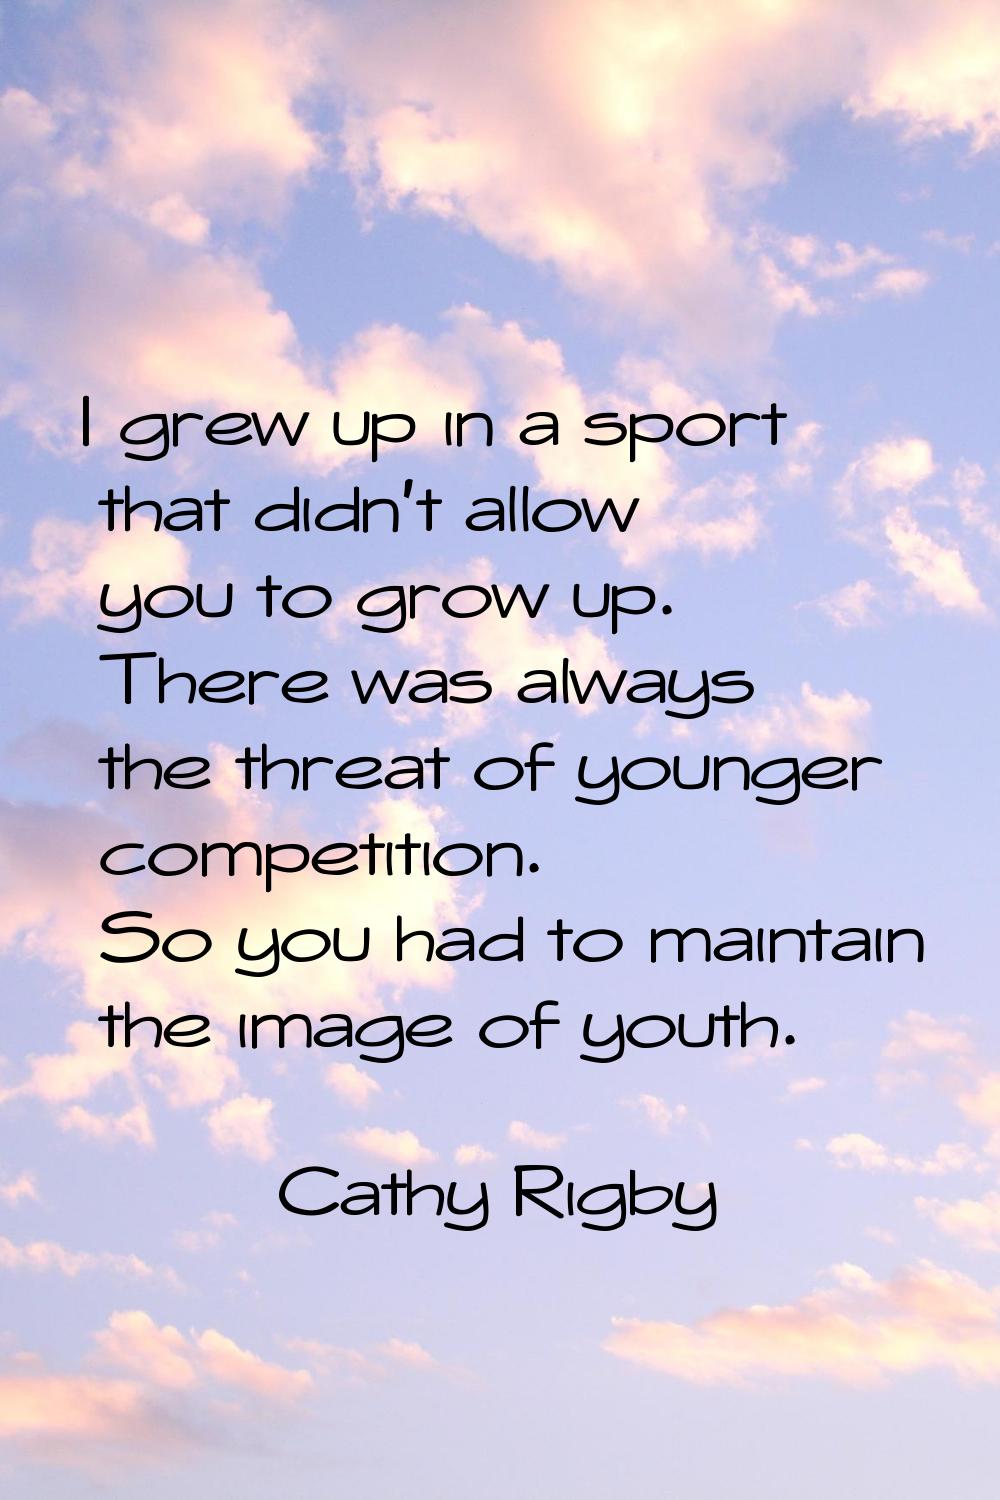 I grew up in a sport that didn't allow you to grow up. There was always the threat of younger compe